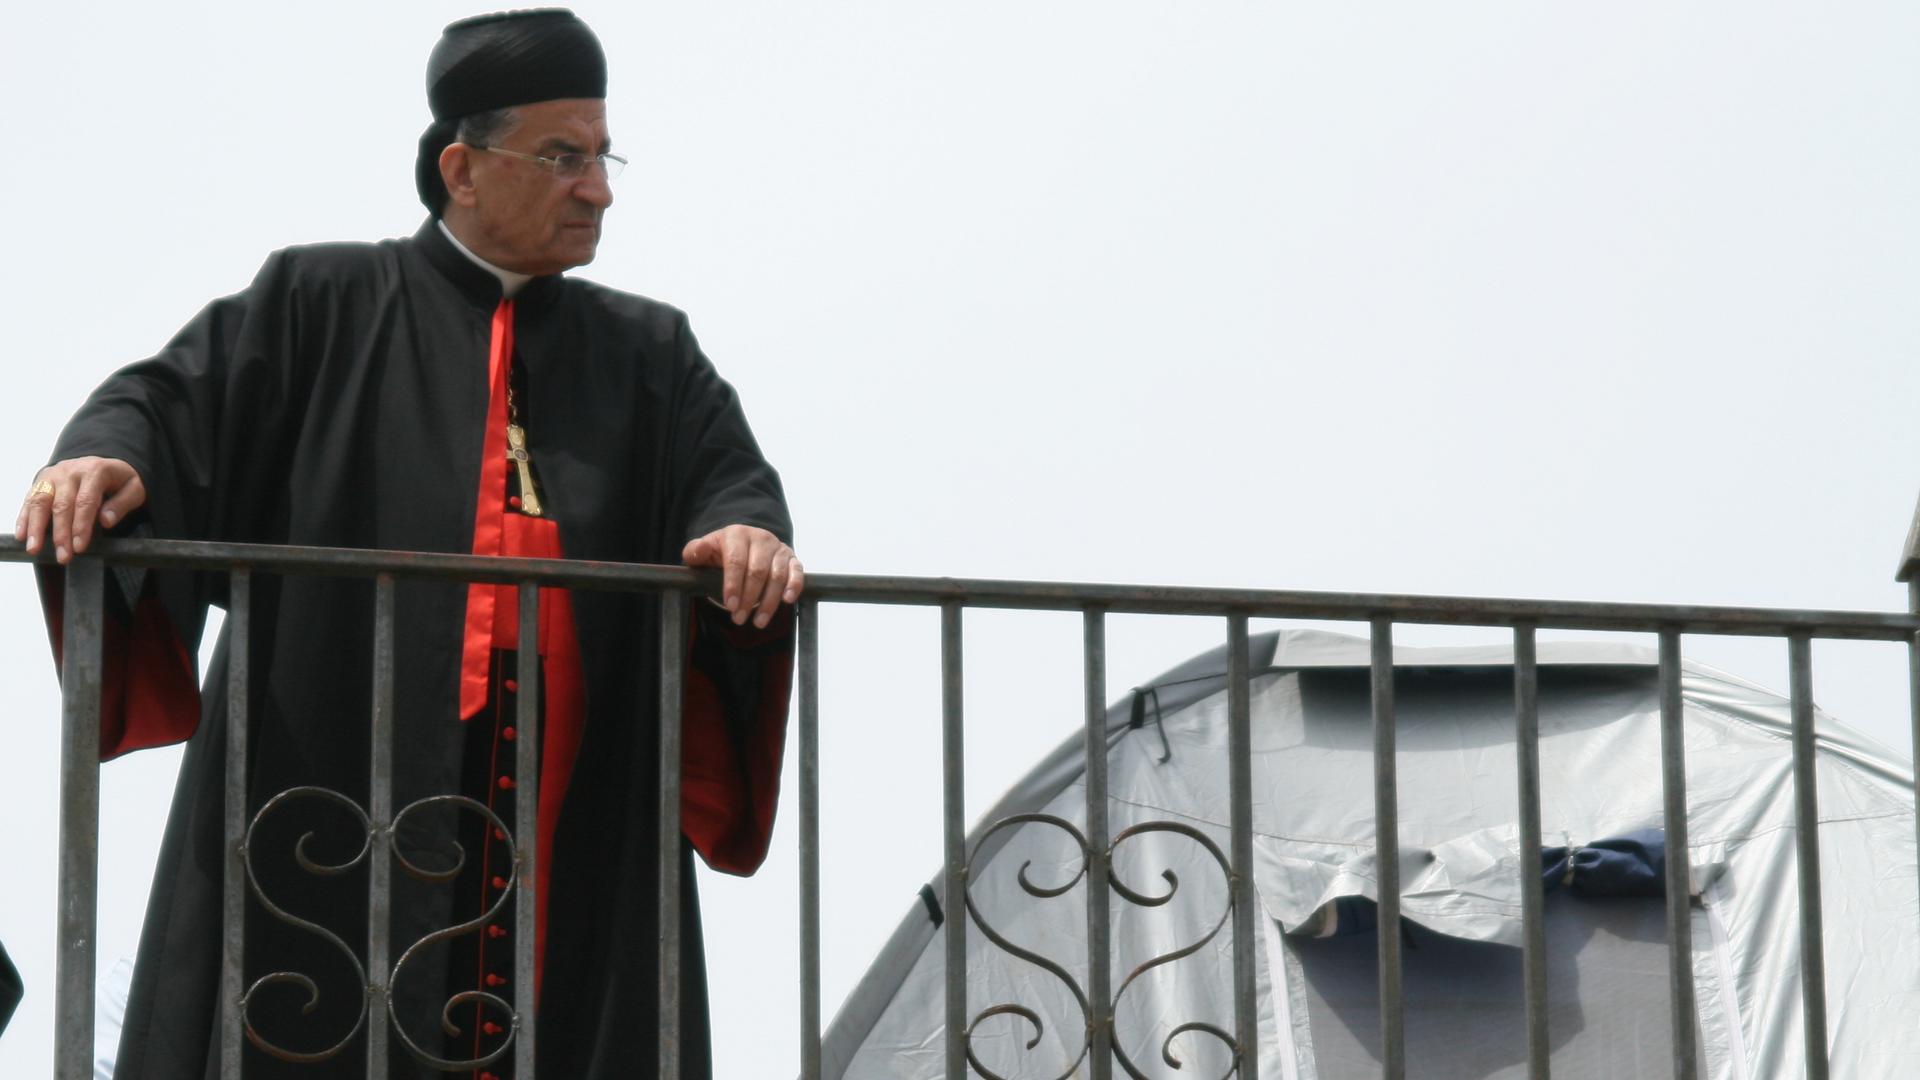 Lebanese Maronite Cardinal Bechara Rai looks over the ruins of Kfar Biram from the top of the village's church in northern Israel. Activists have been living in tents on the site for months to pressure Israel to rebuild the destroyed community.